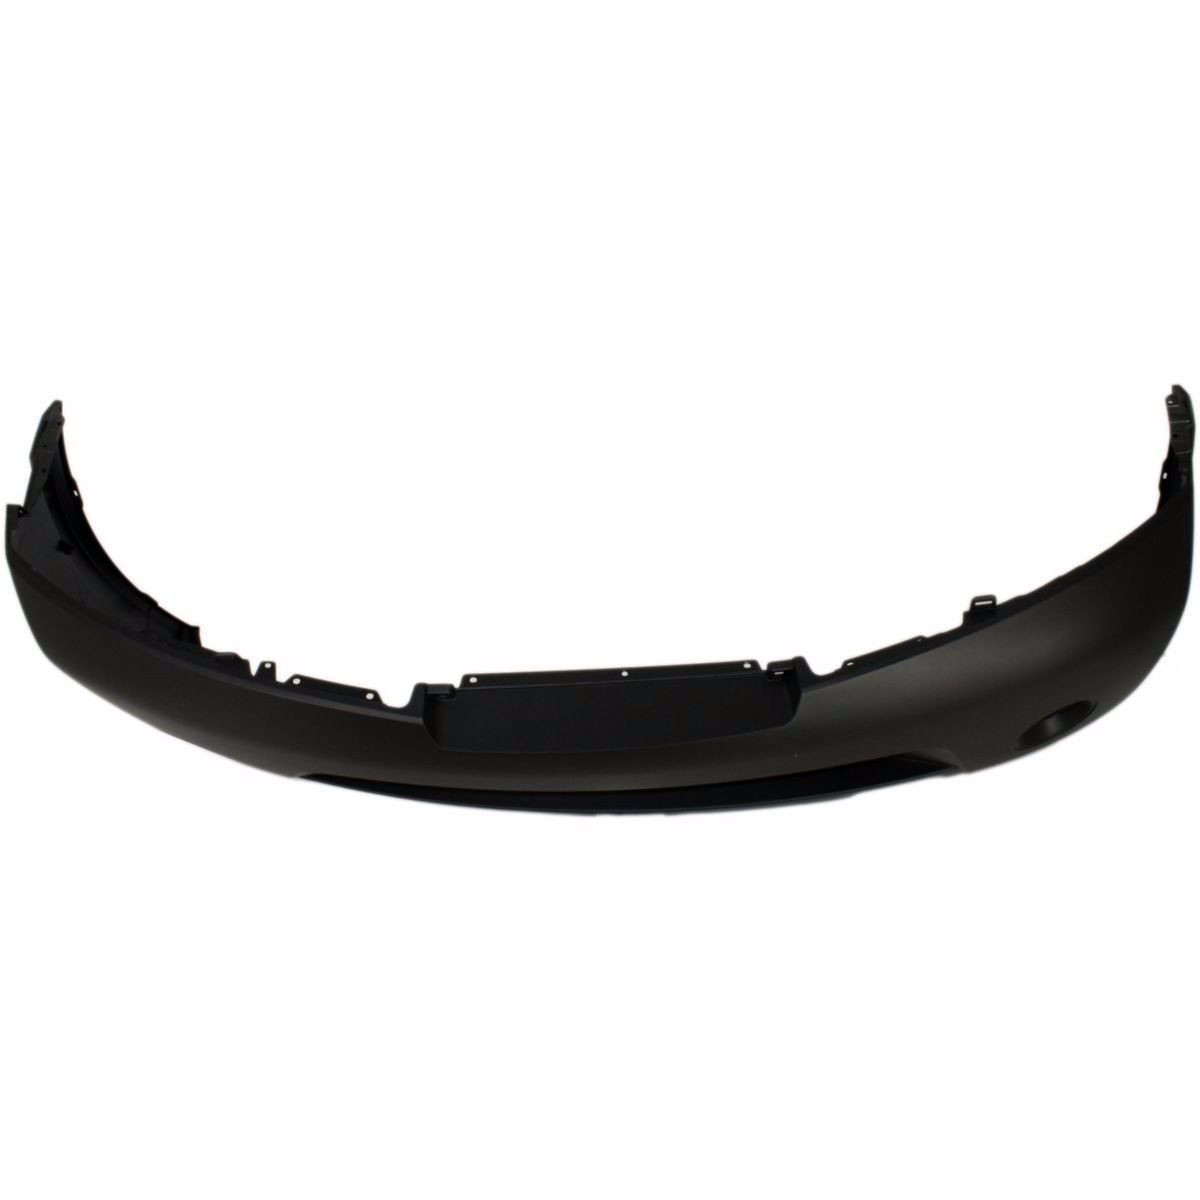 2008-2015 NISSAN ARMADA Front Bumper Cover w/o Park Distance Sensors Painted to Match